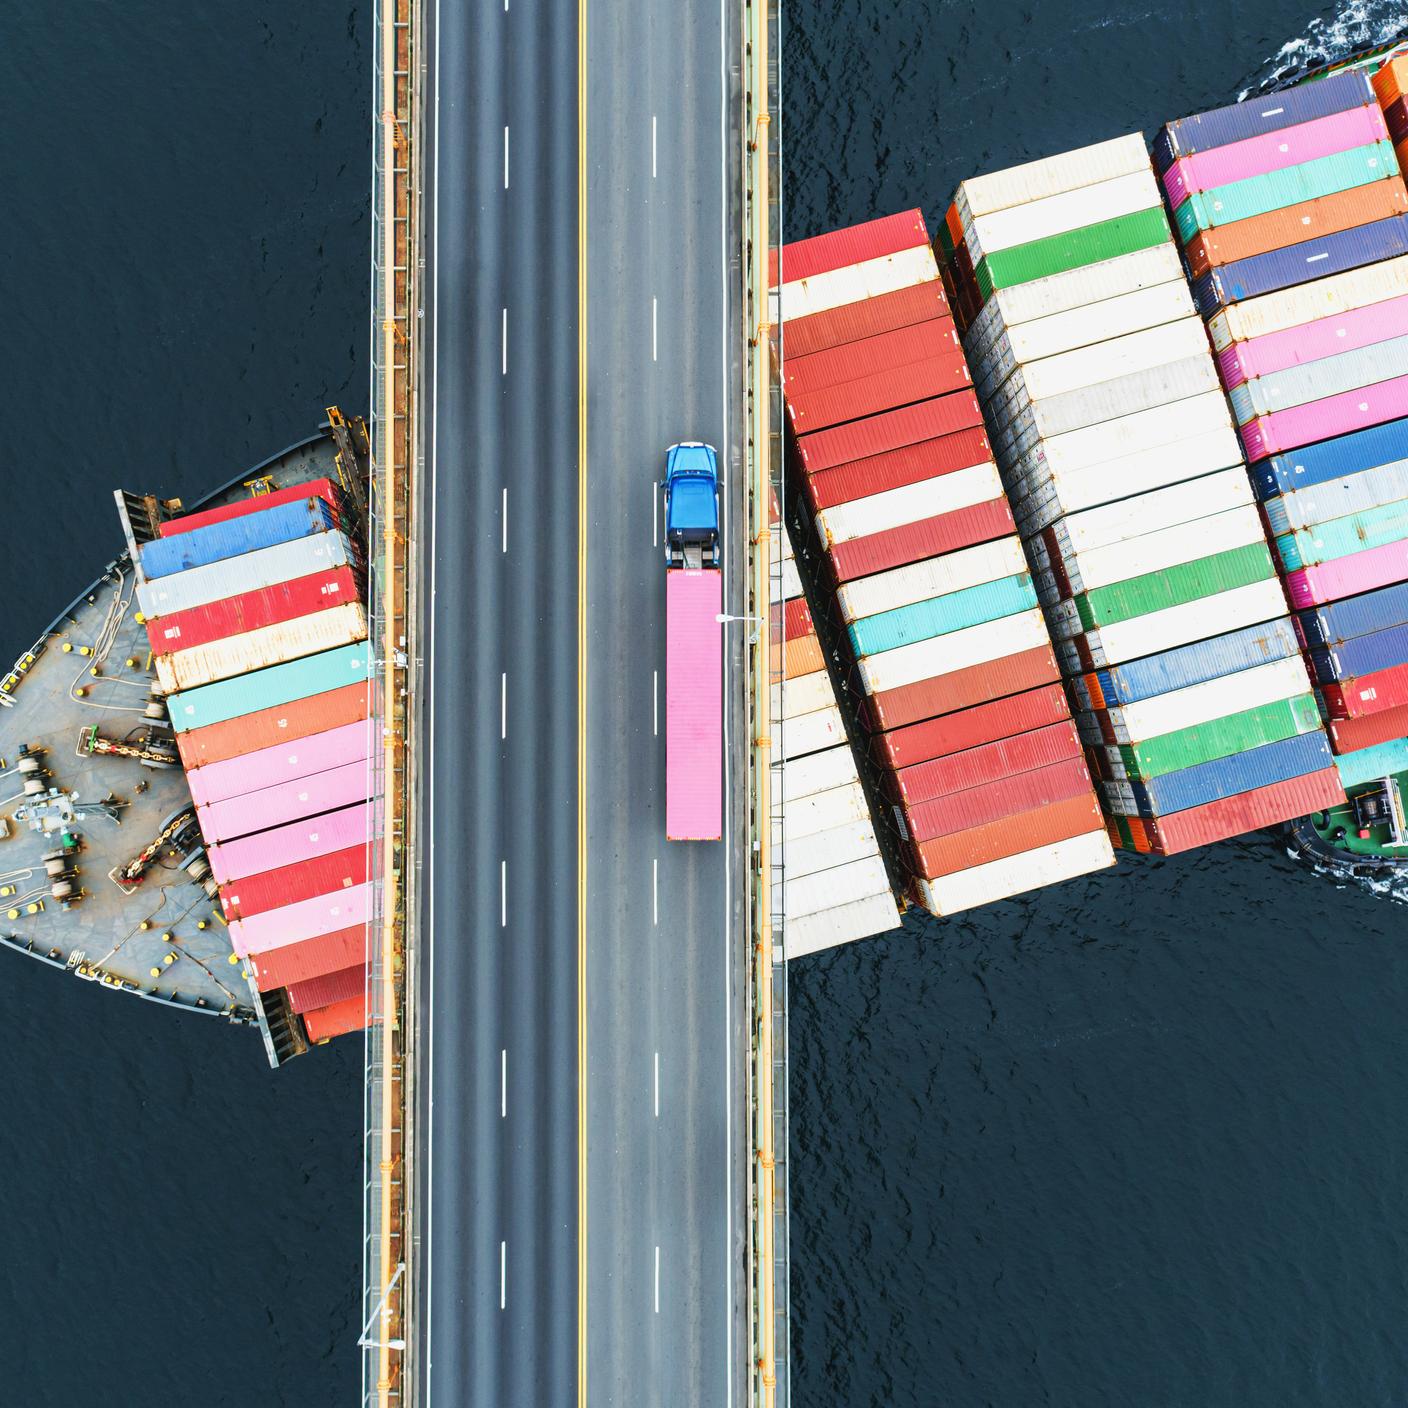 Aerial view of a container ship passing beneath a bridge while semi truck crosses above